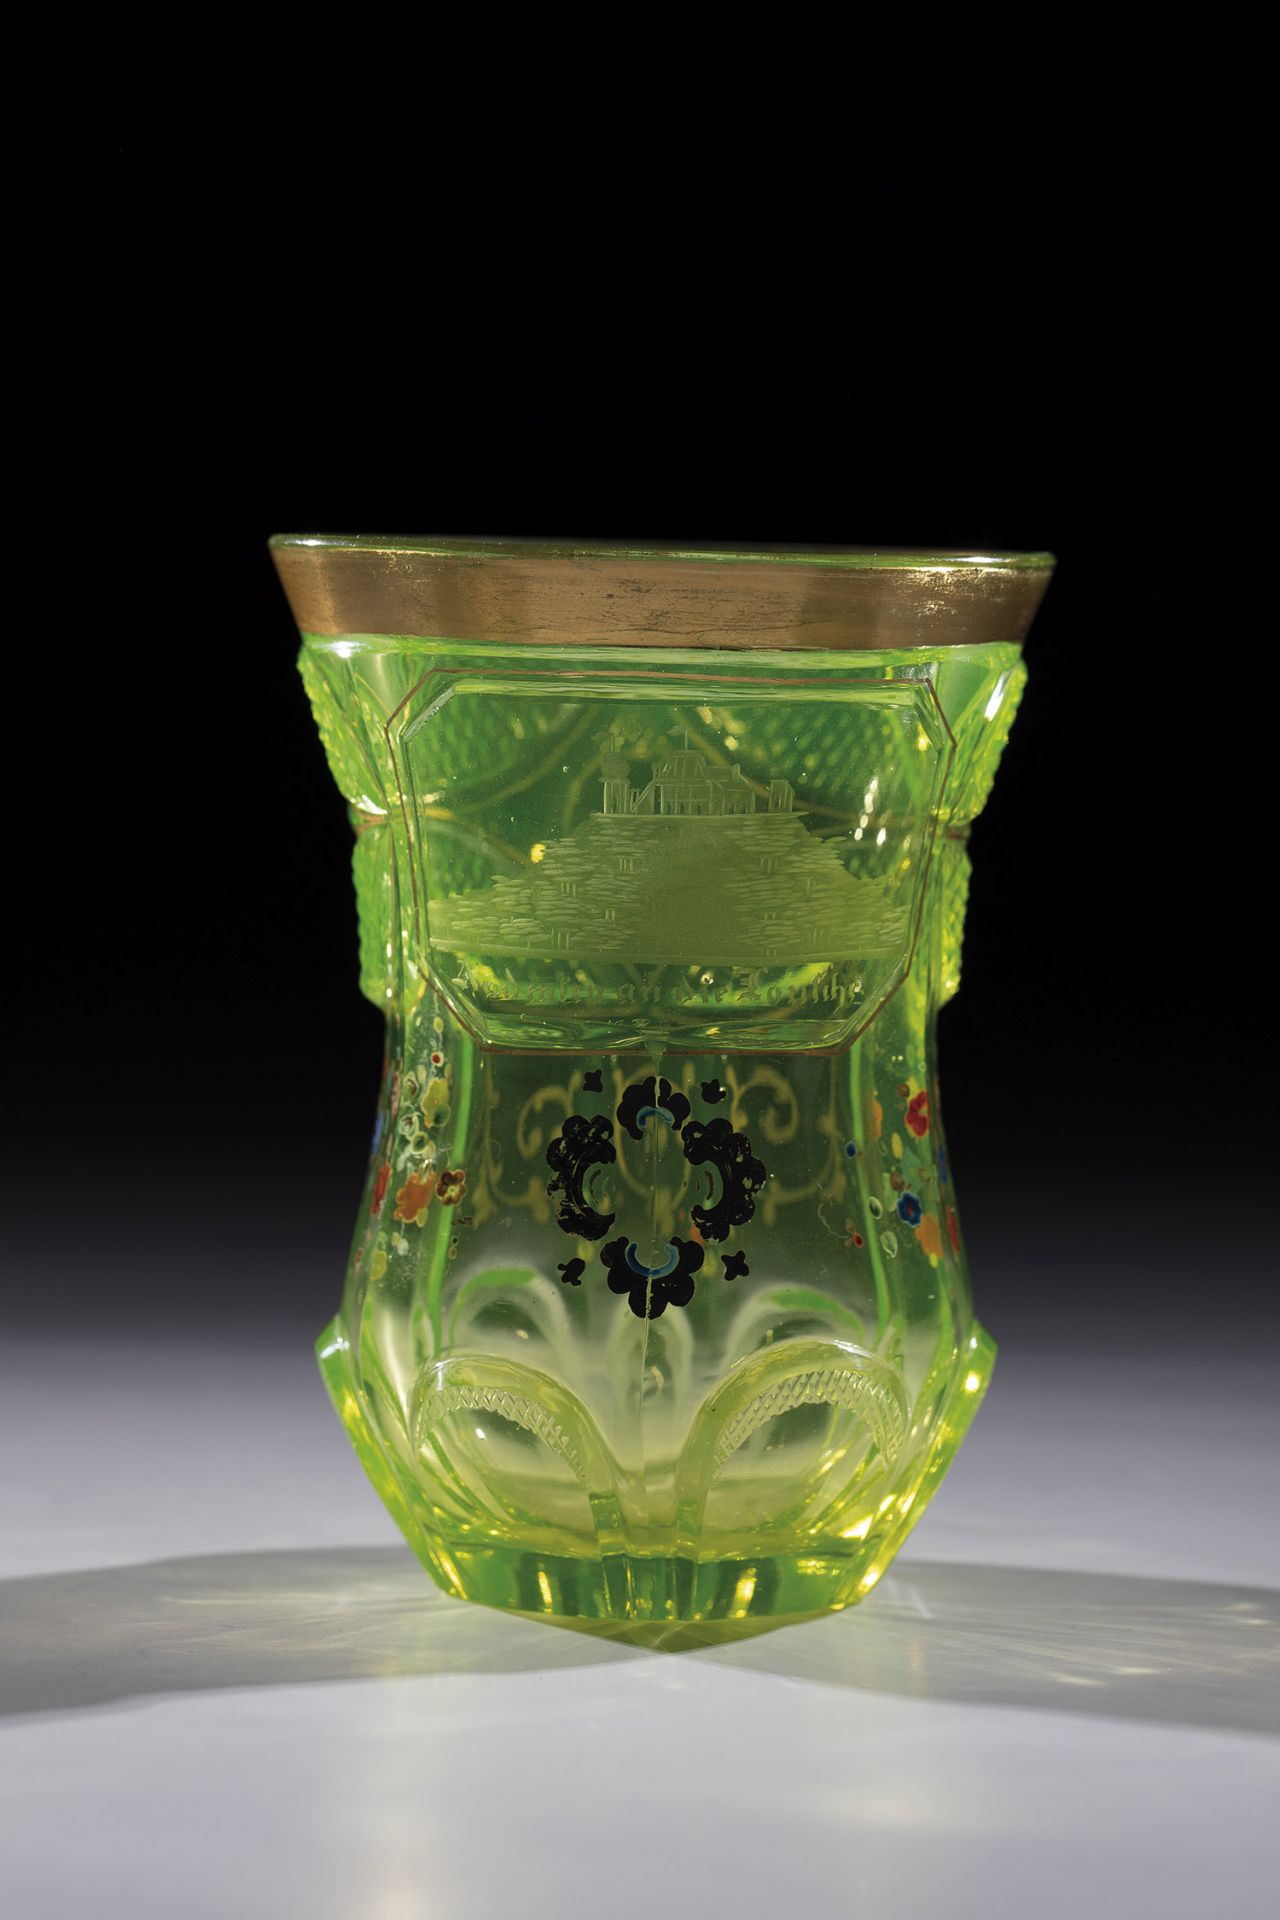 Uranium glass beaker with a view of Bohemia, ca. 1840 Uranium glass. Back with notched star. Base of